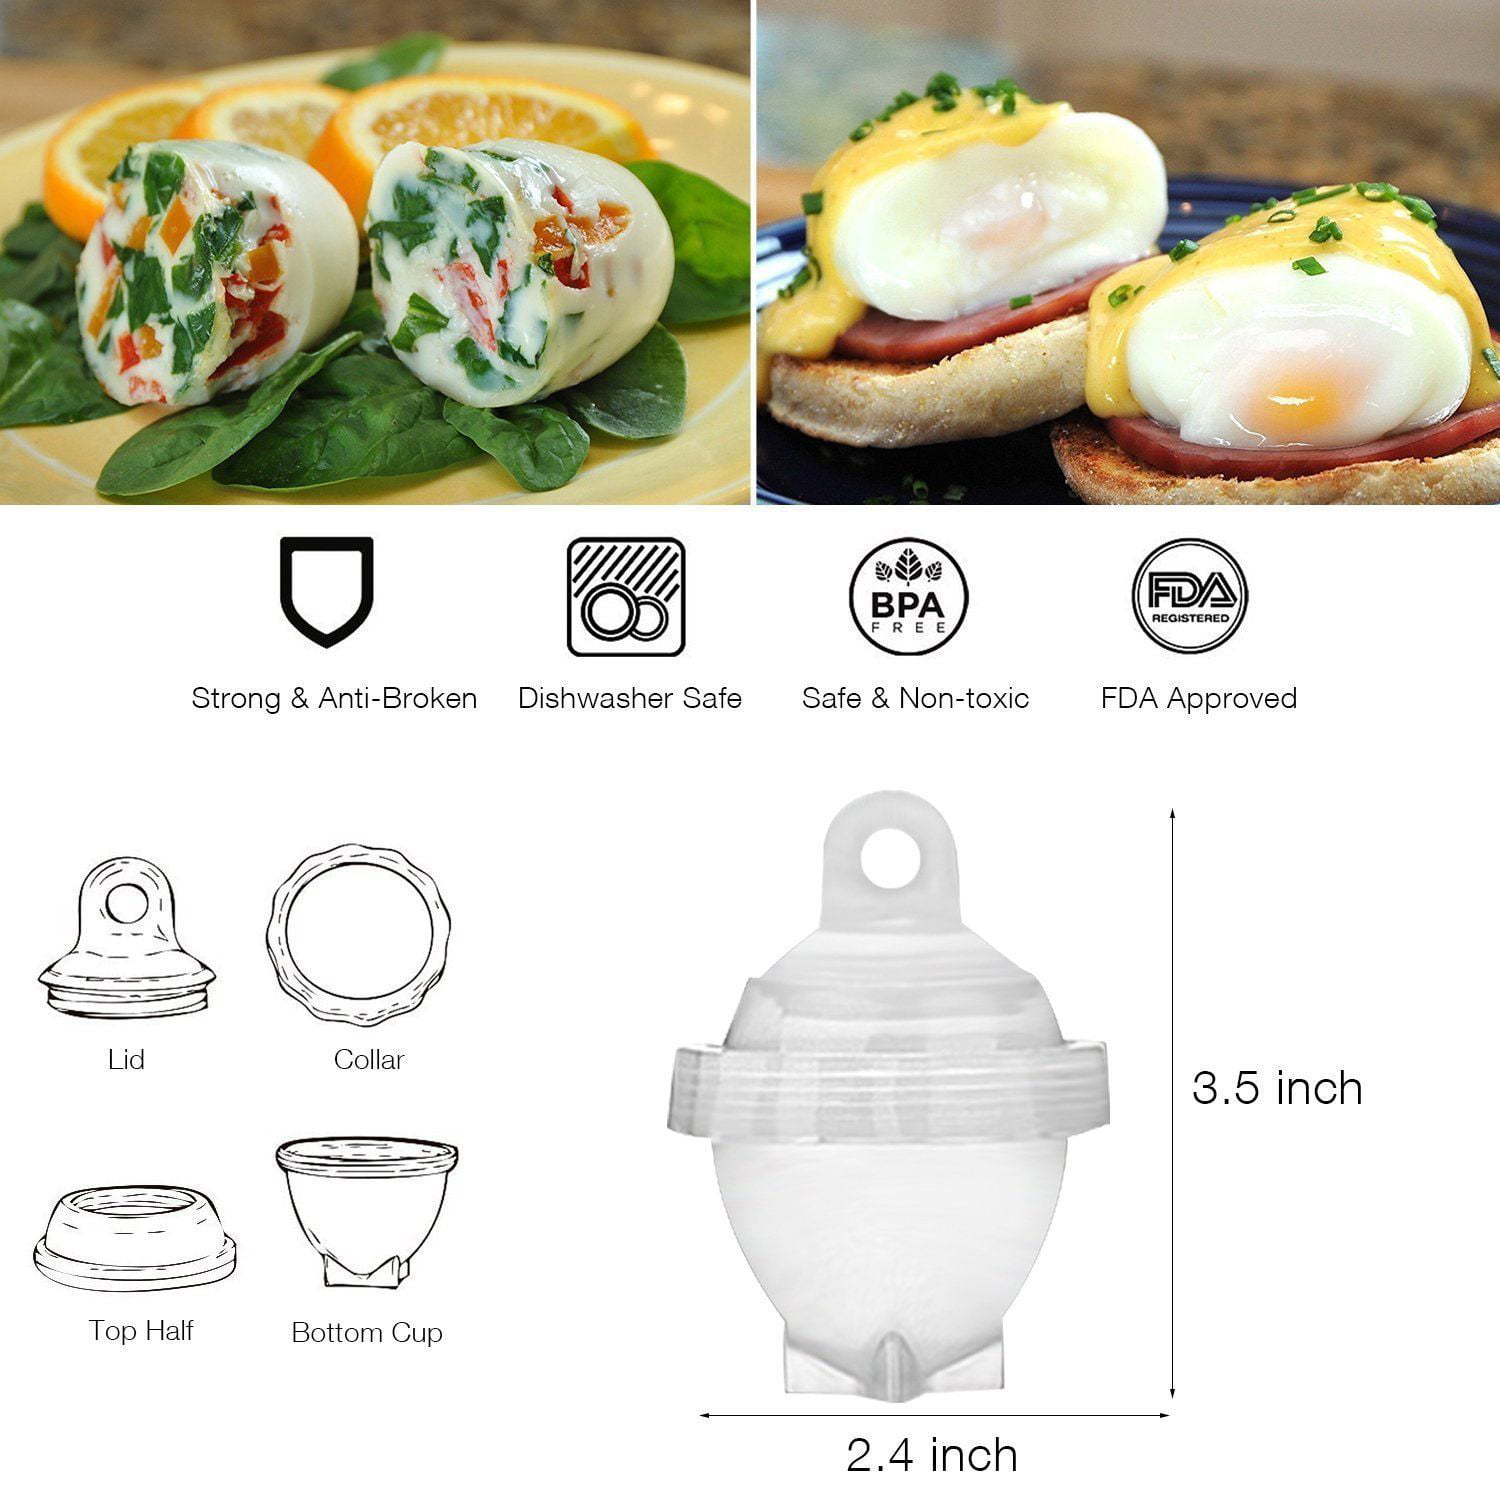 Do You Need a $20 Hard-Boiled Egg Maker? - You Can Do This! 